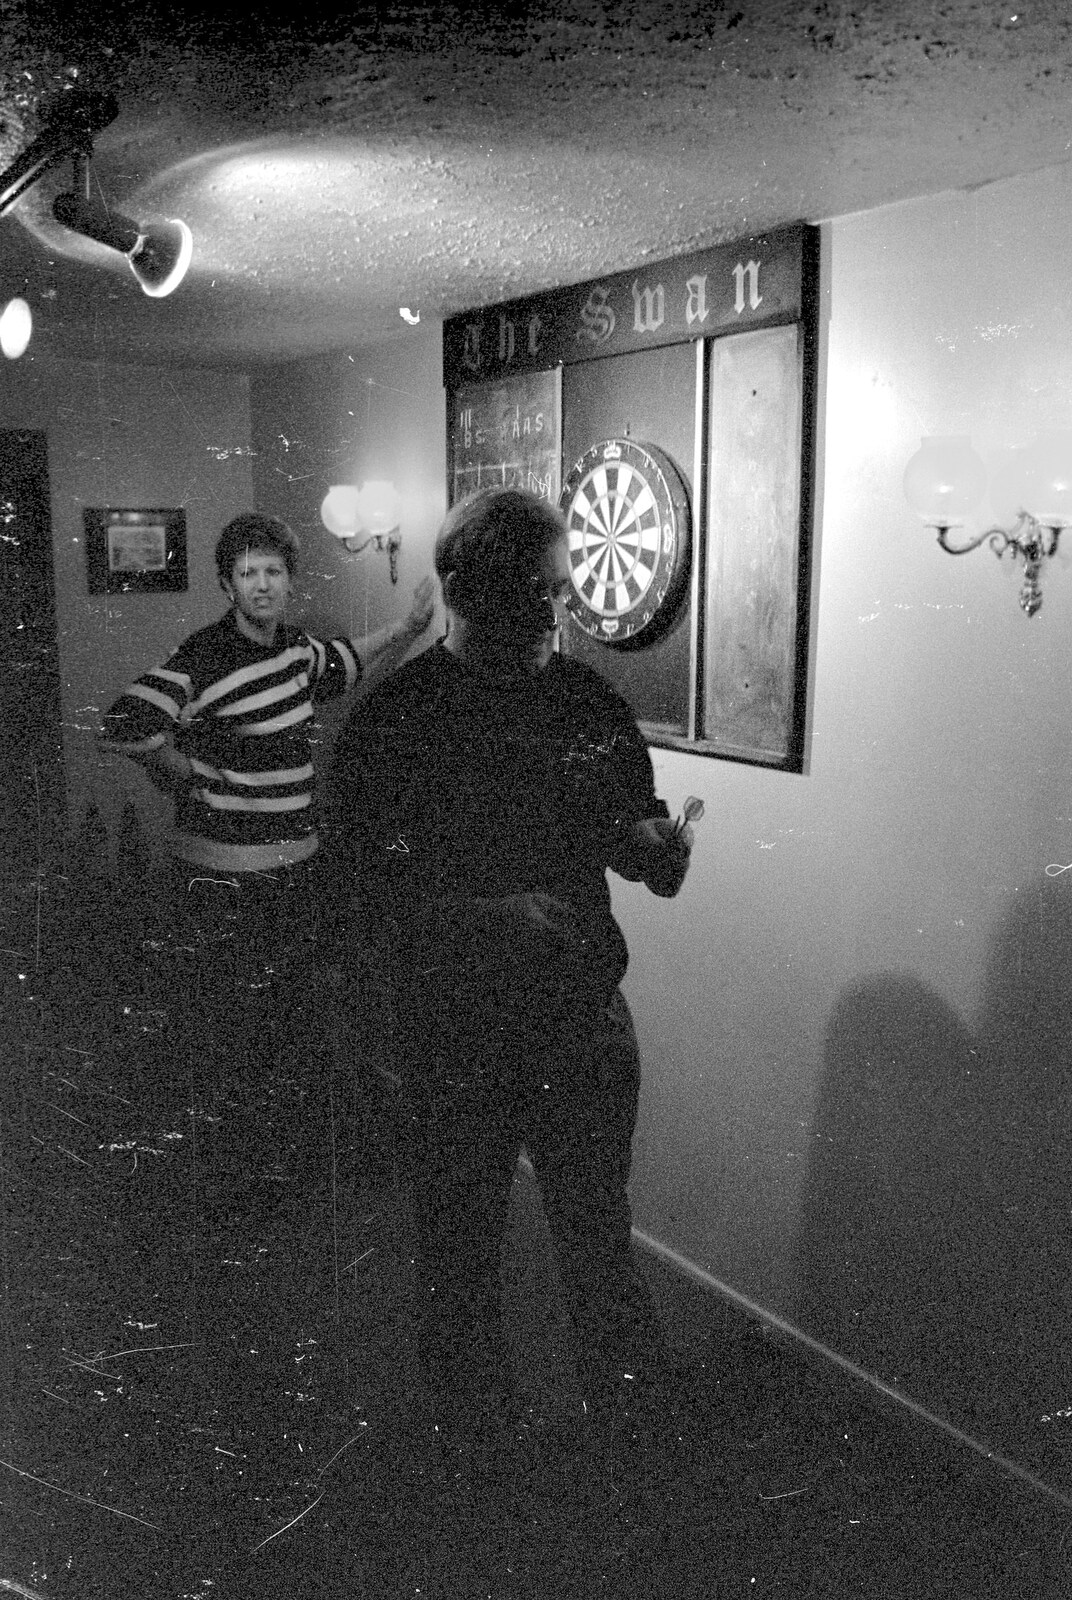 Darts in the Swan Inn from Darts at the Swan Inn and a Nigel Party, Lancaster Gate - 23rd March 1991